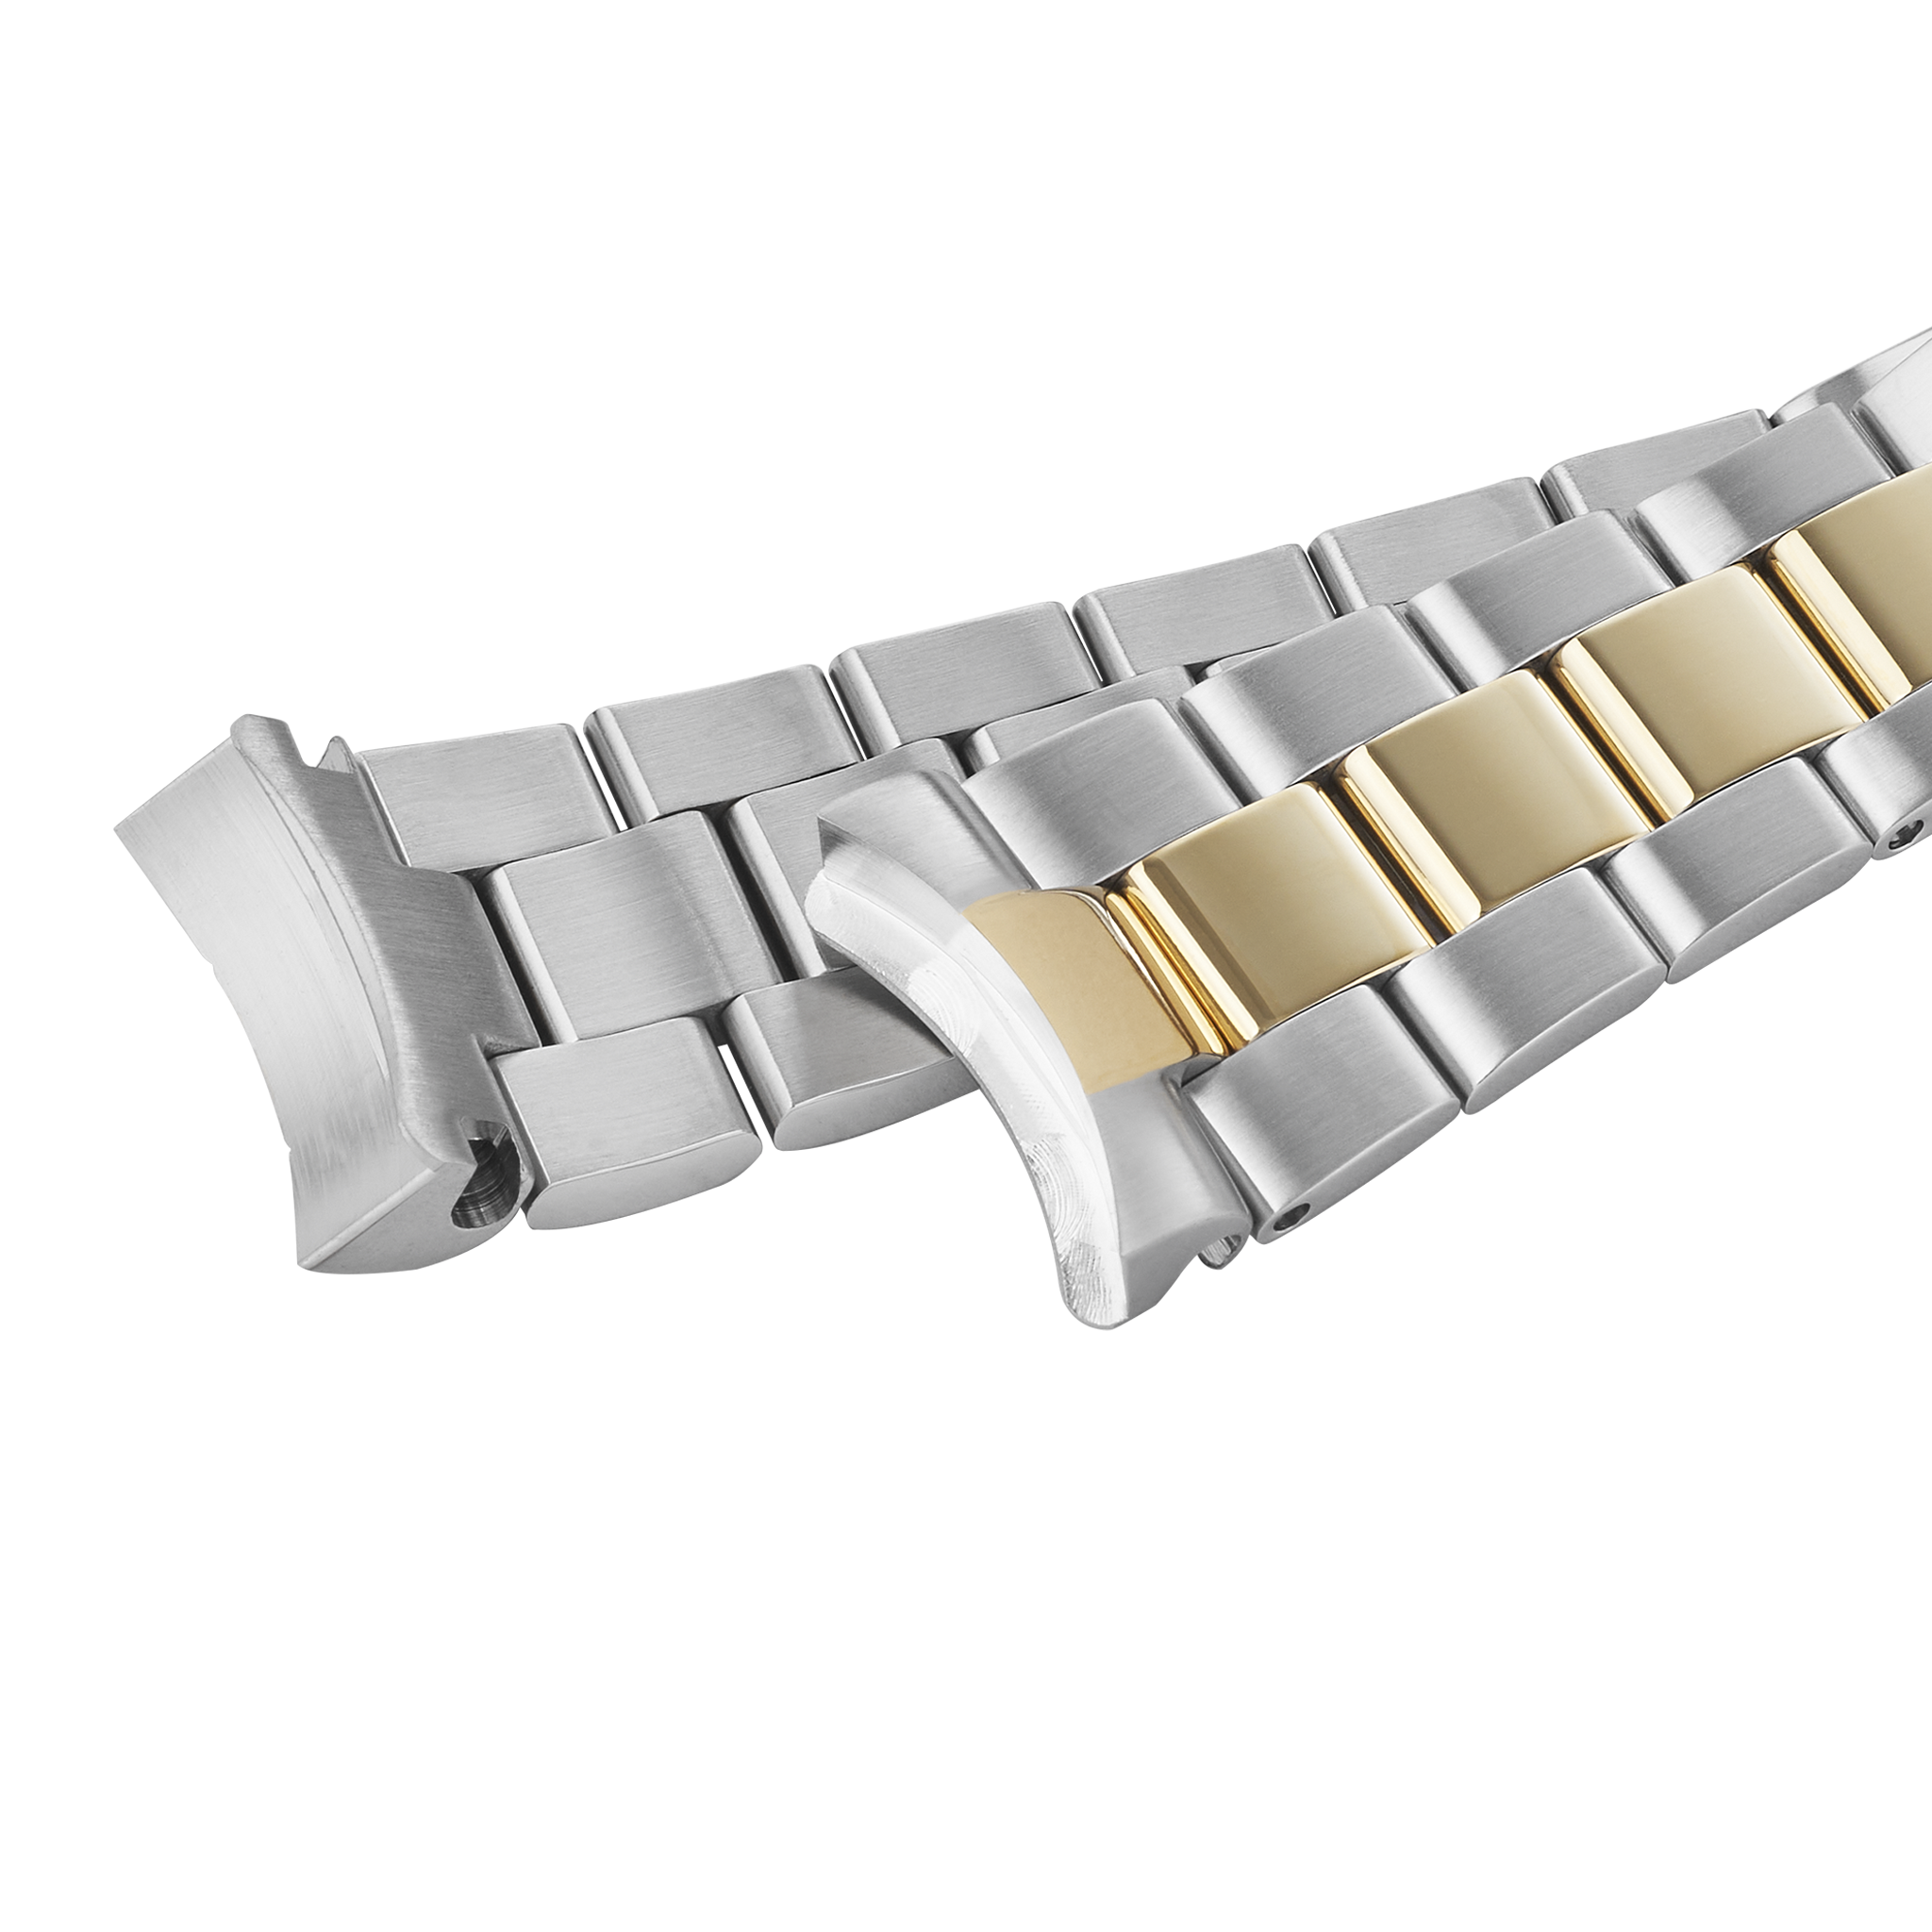 Yellow gold plated stainless steel Mechanicco Colorama bracelet